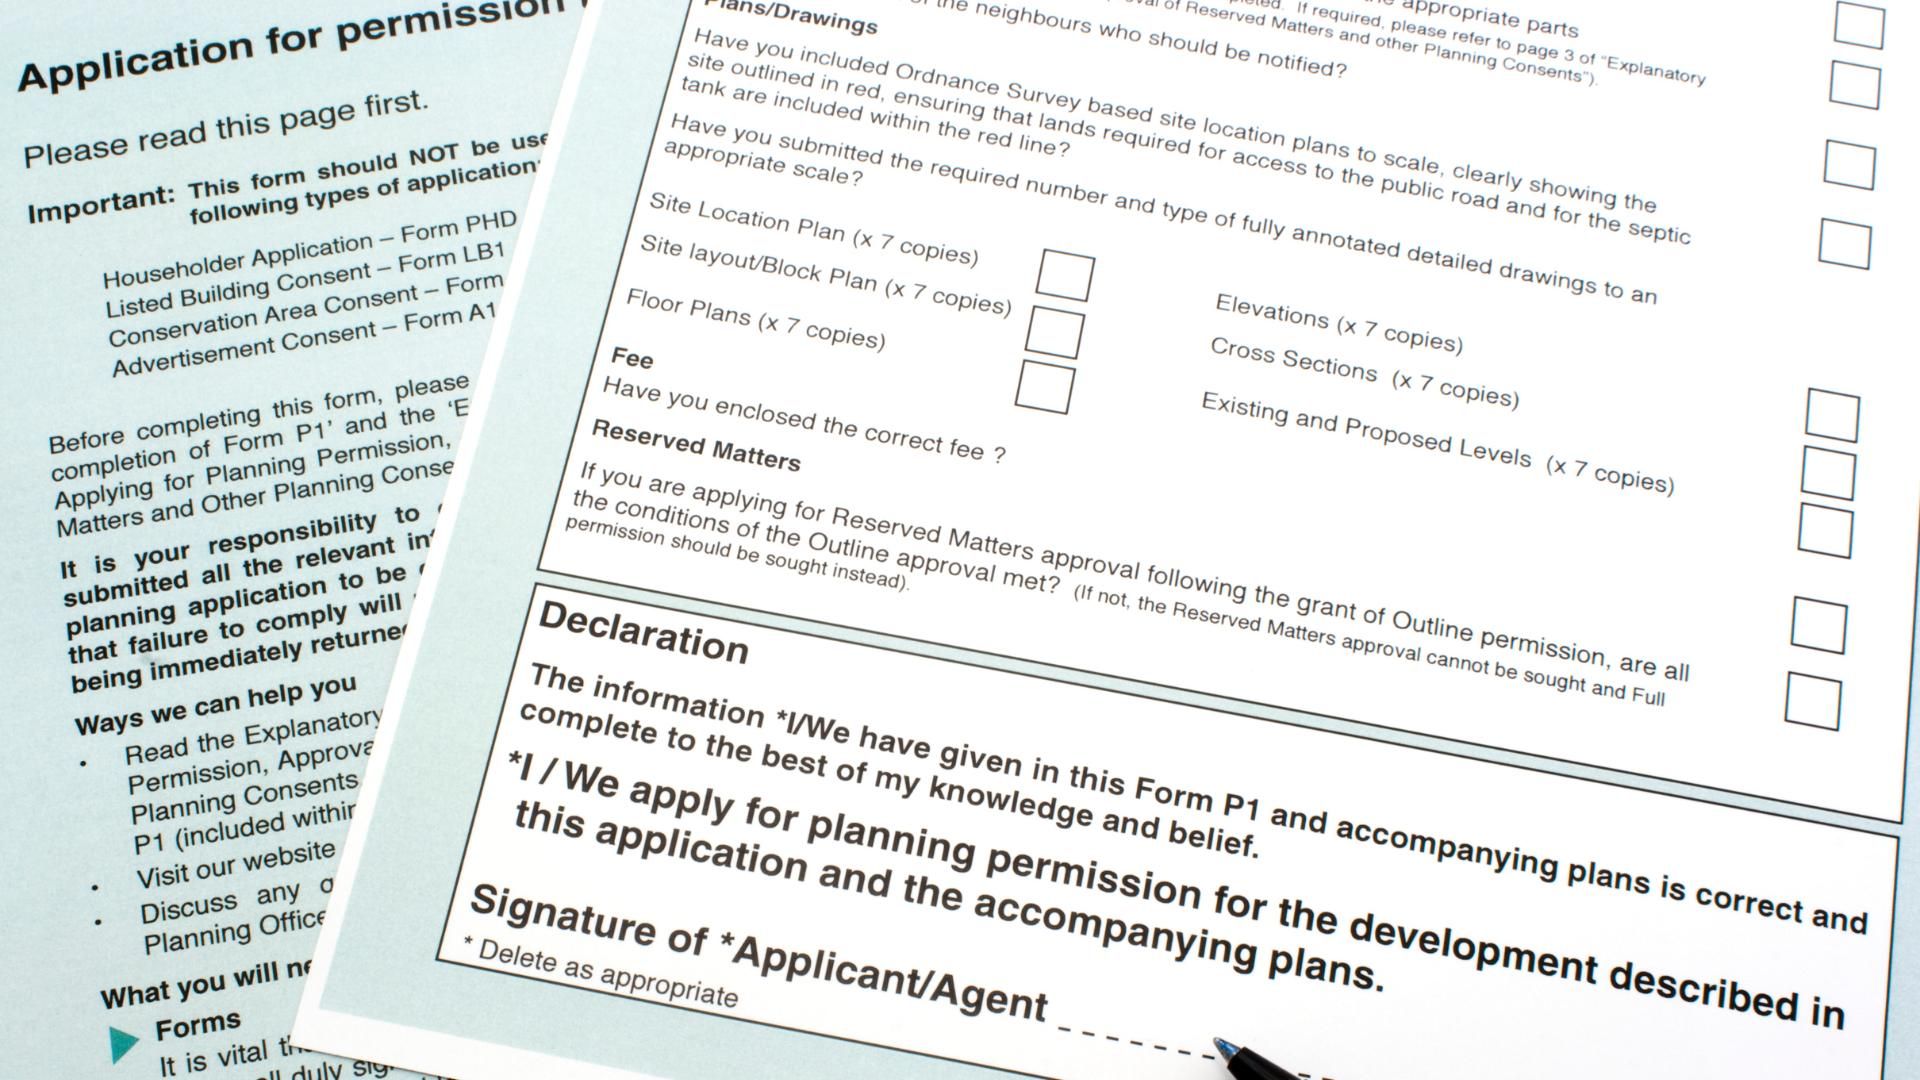 Planning permission: the easy way to add value?